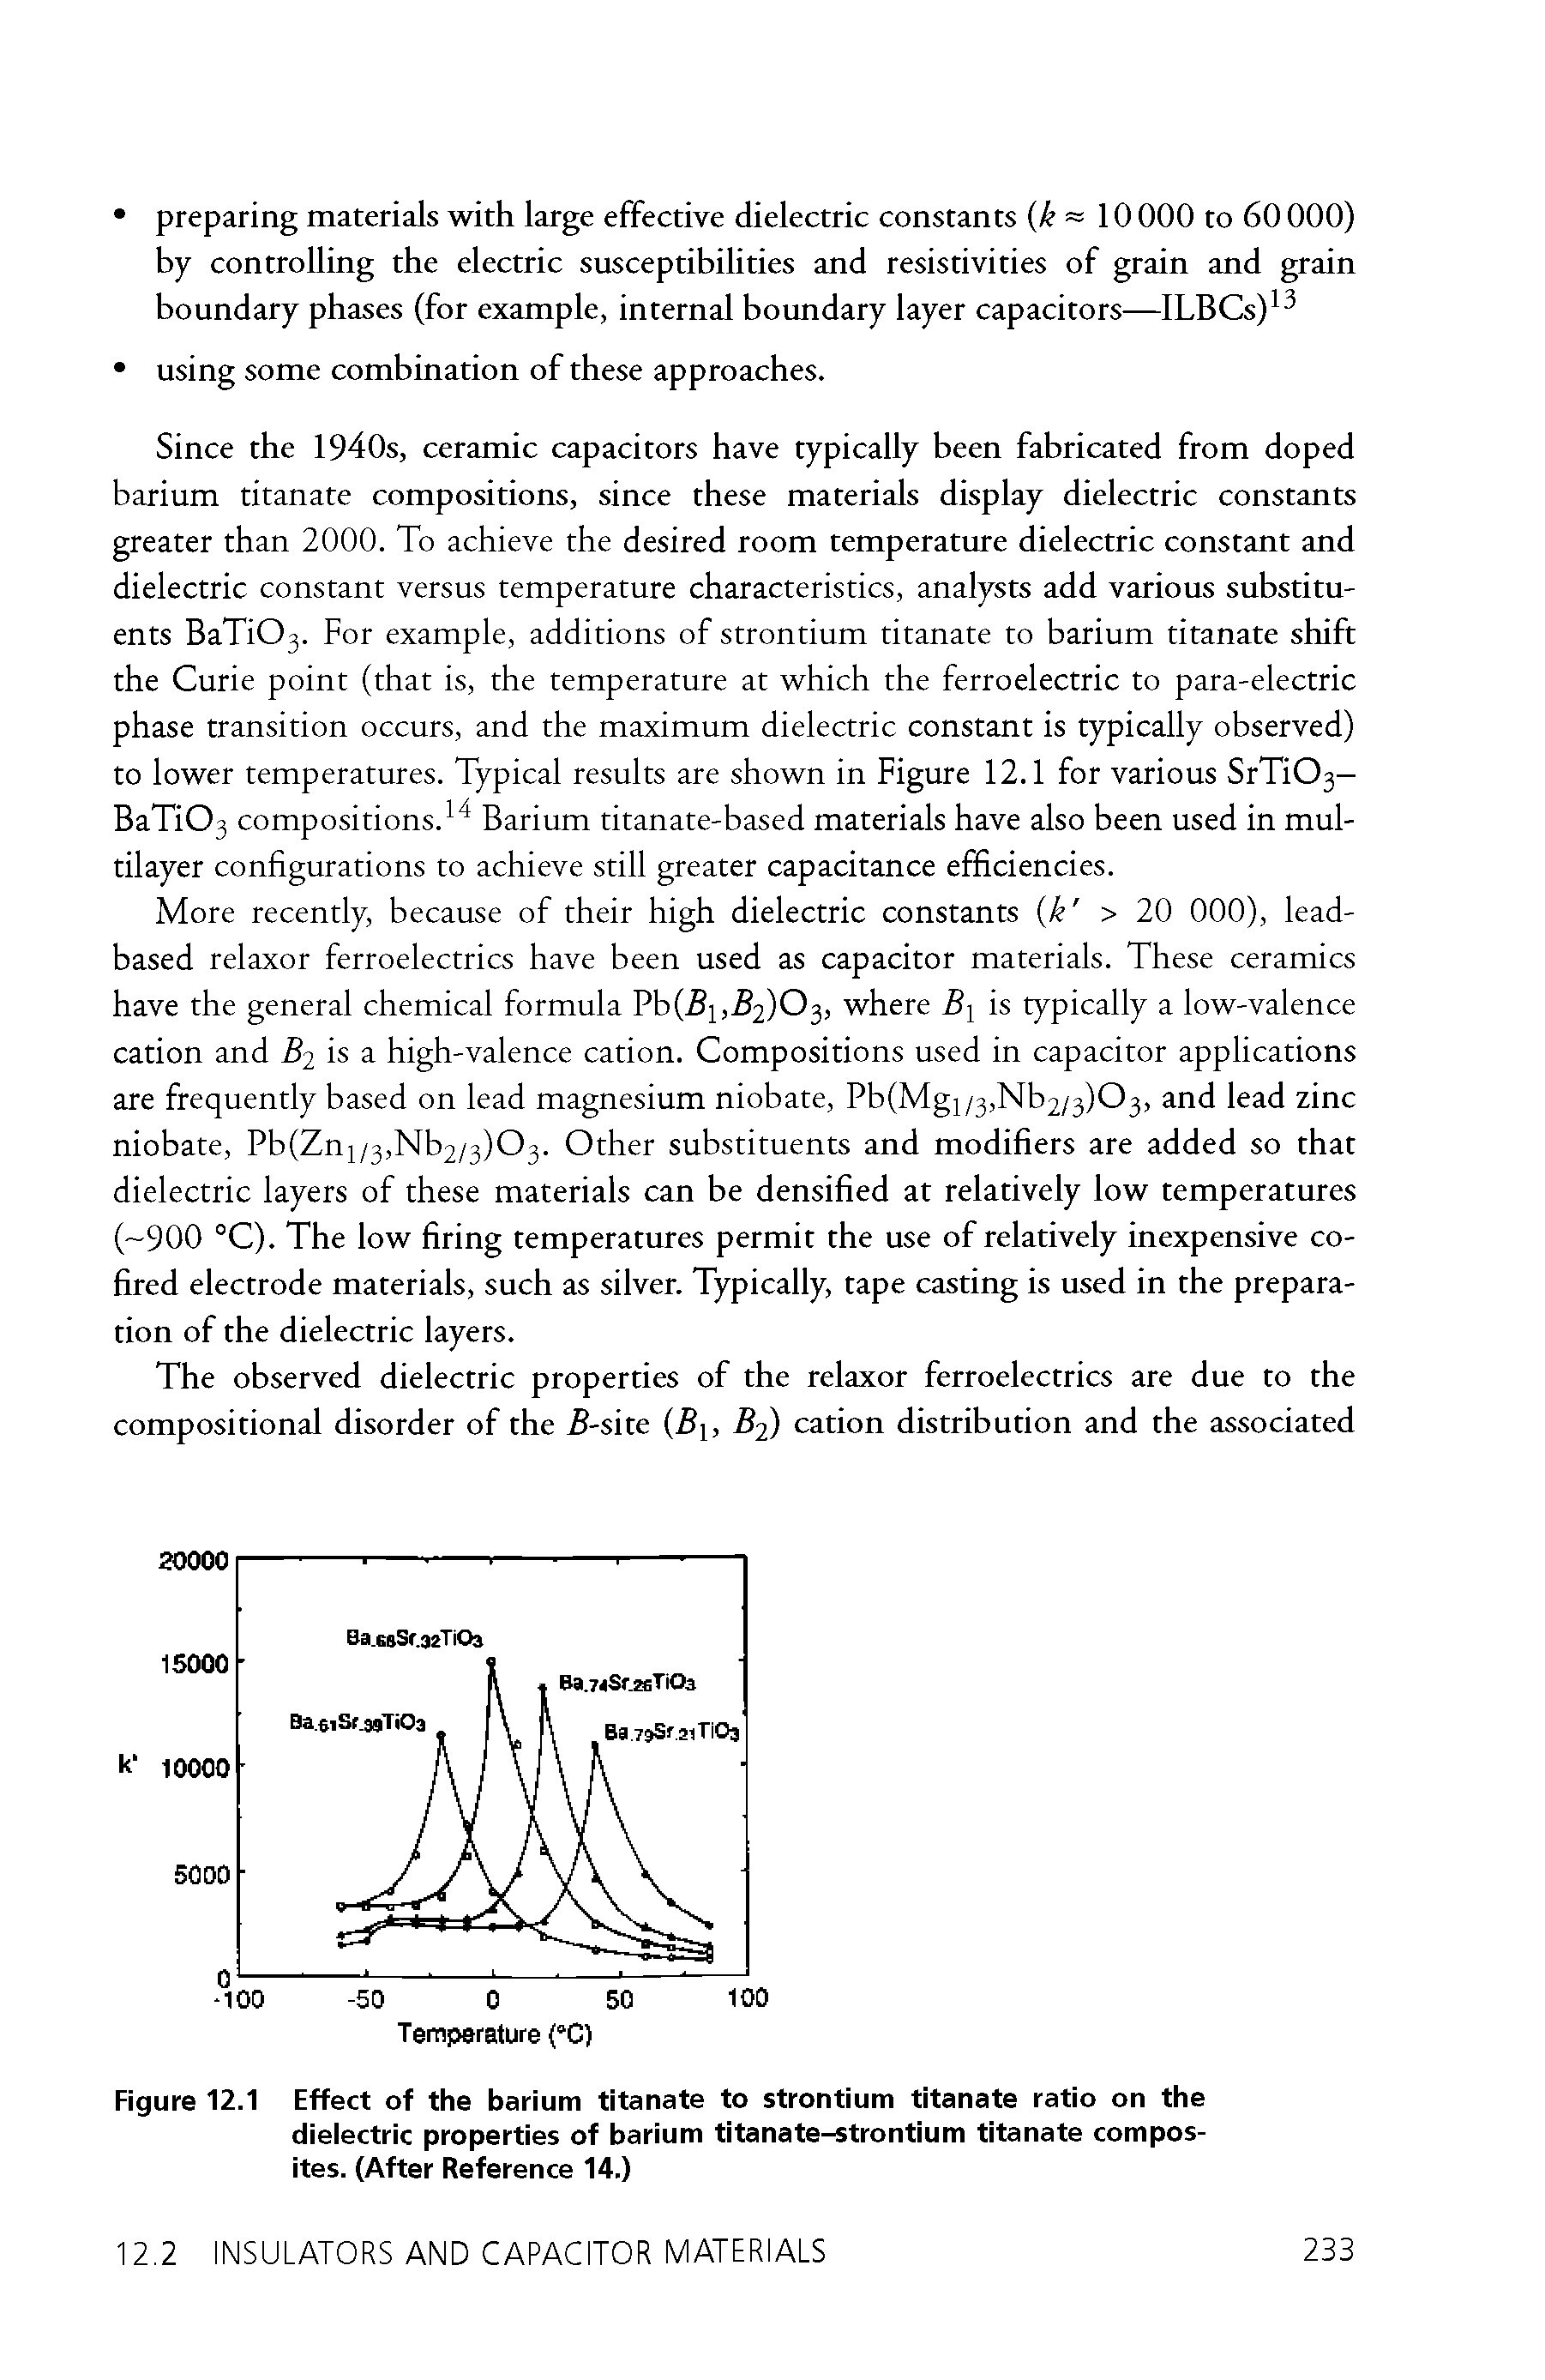 Figure 12.1 Effect of the barium titanate to strontium titanate ratio on the dielectric properties of barium titanate-strontium titanate composites. (After Reference 14.)...